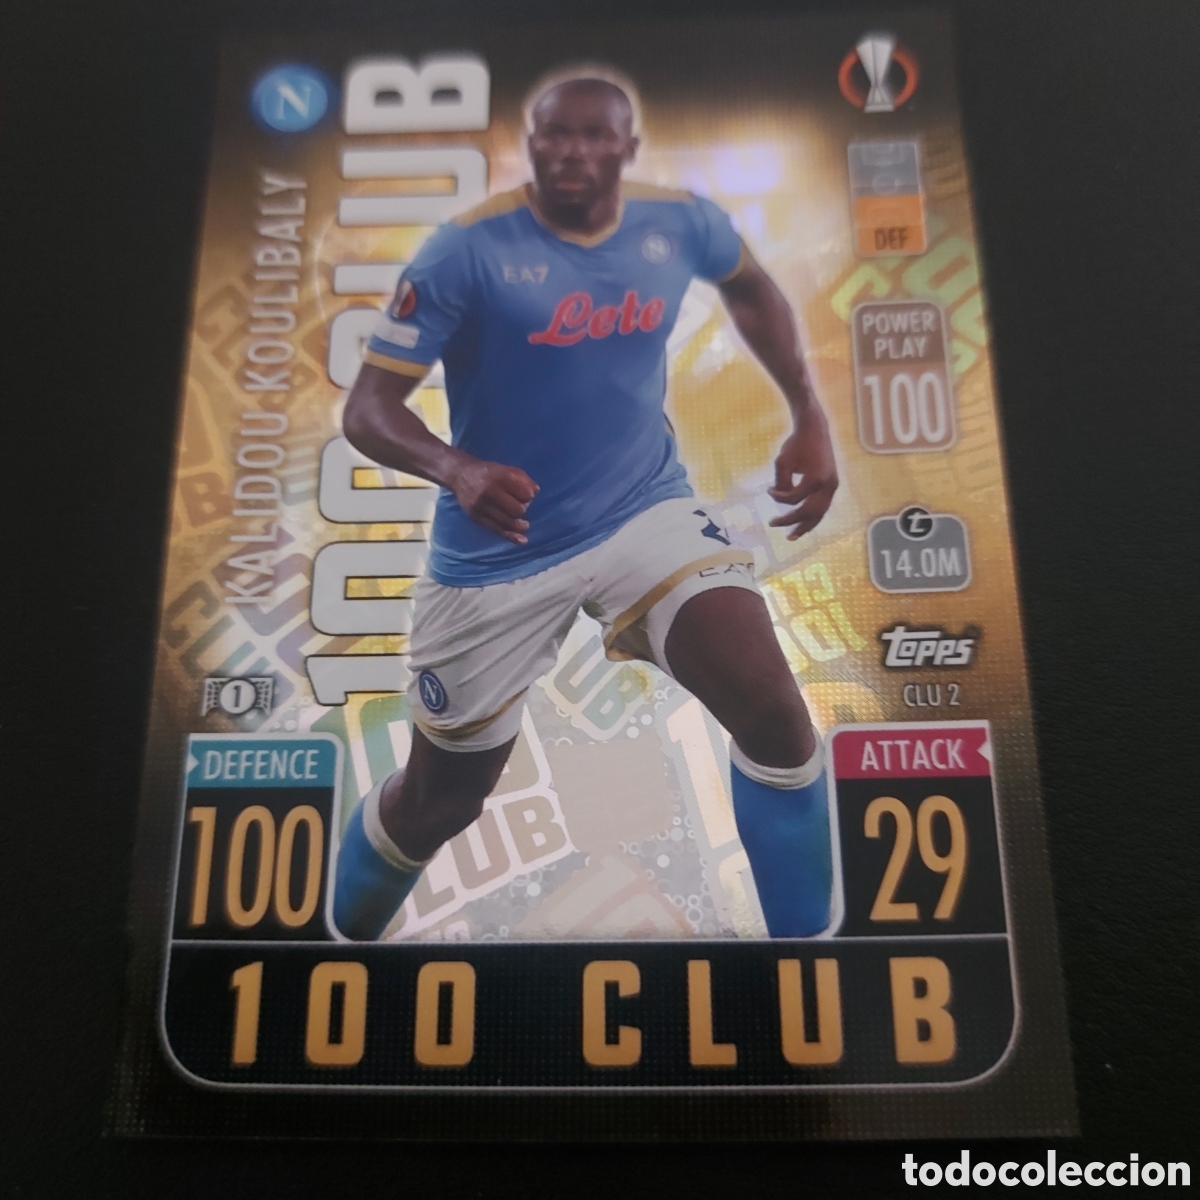 koulibaly - napoles - clu2 - 100 club - topps m - Buy Collectible football  stickers on todocoleccion